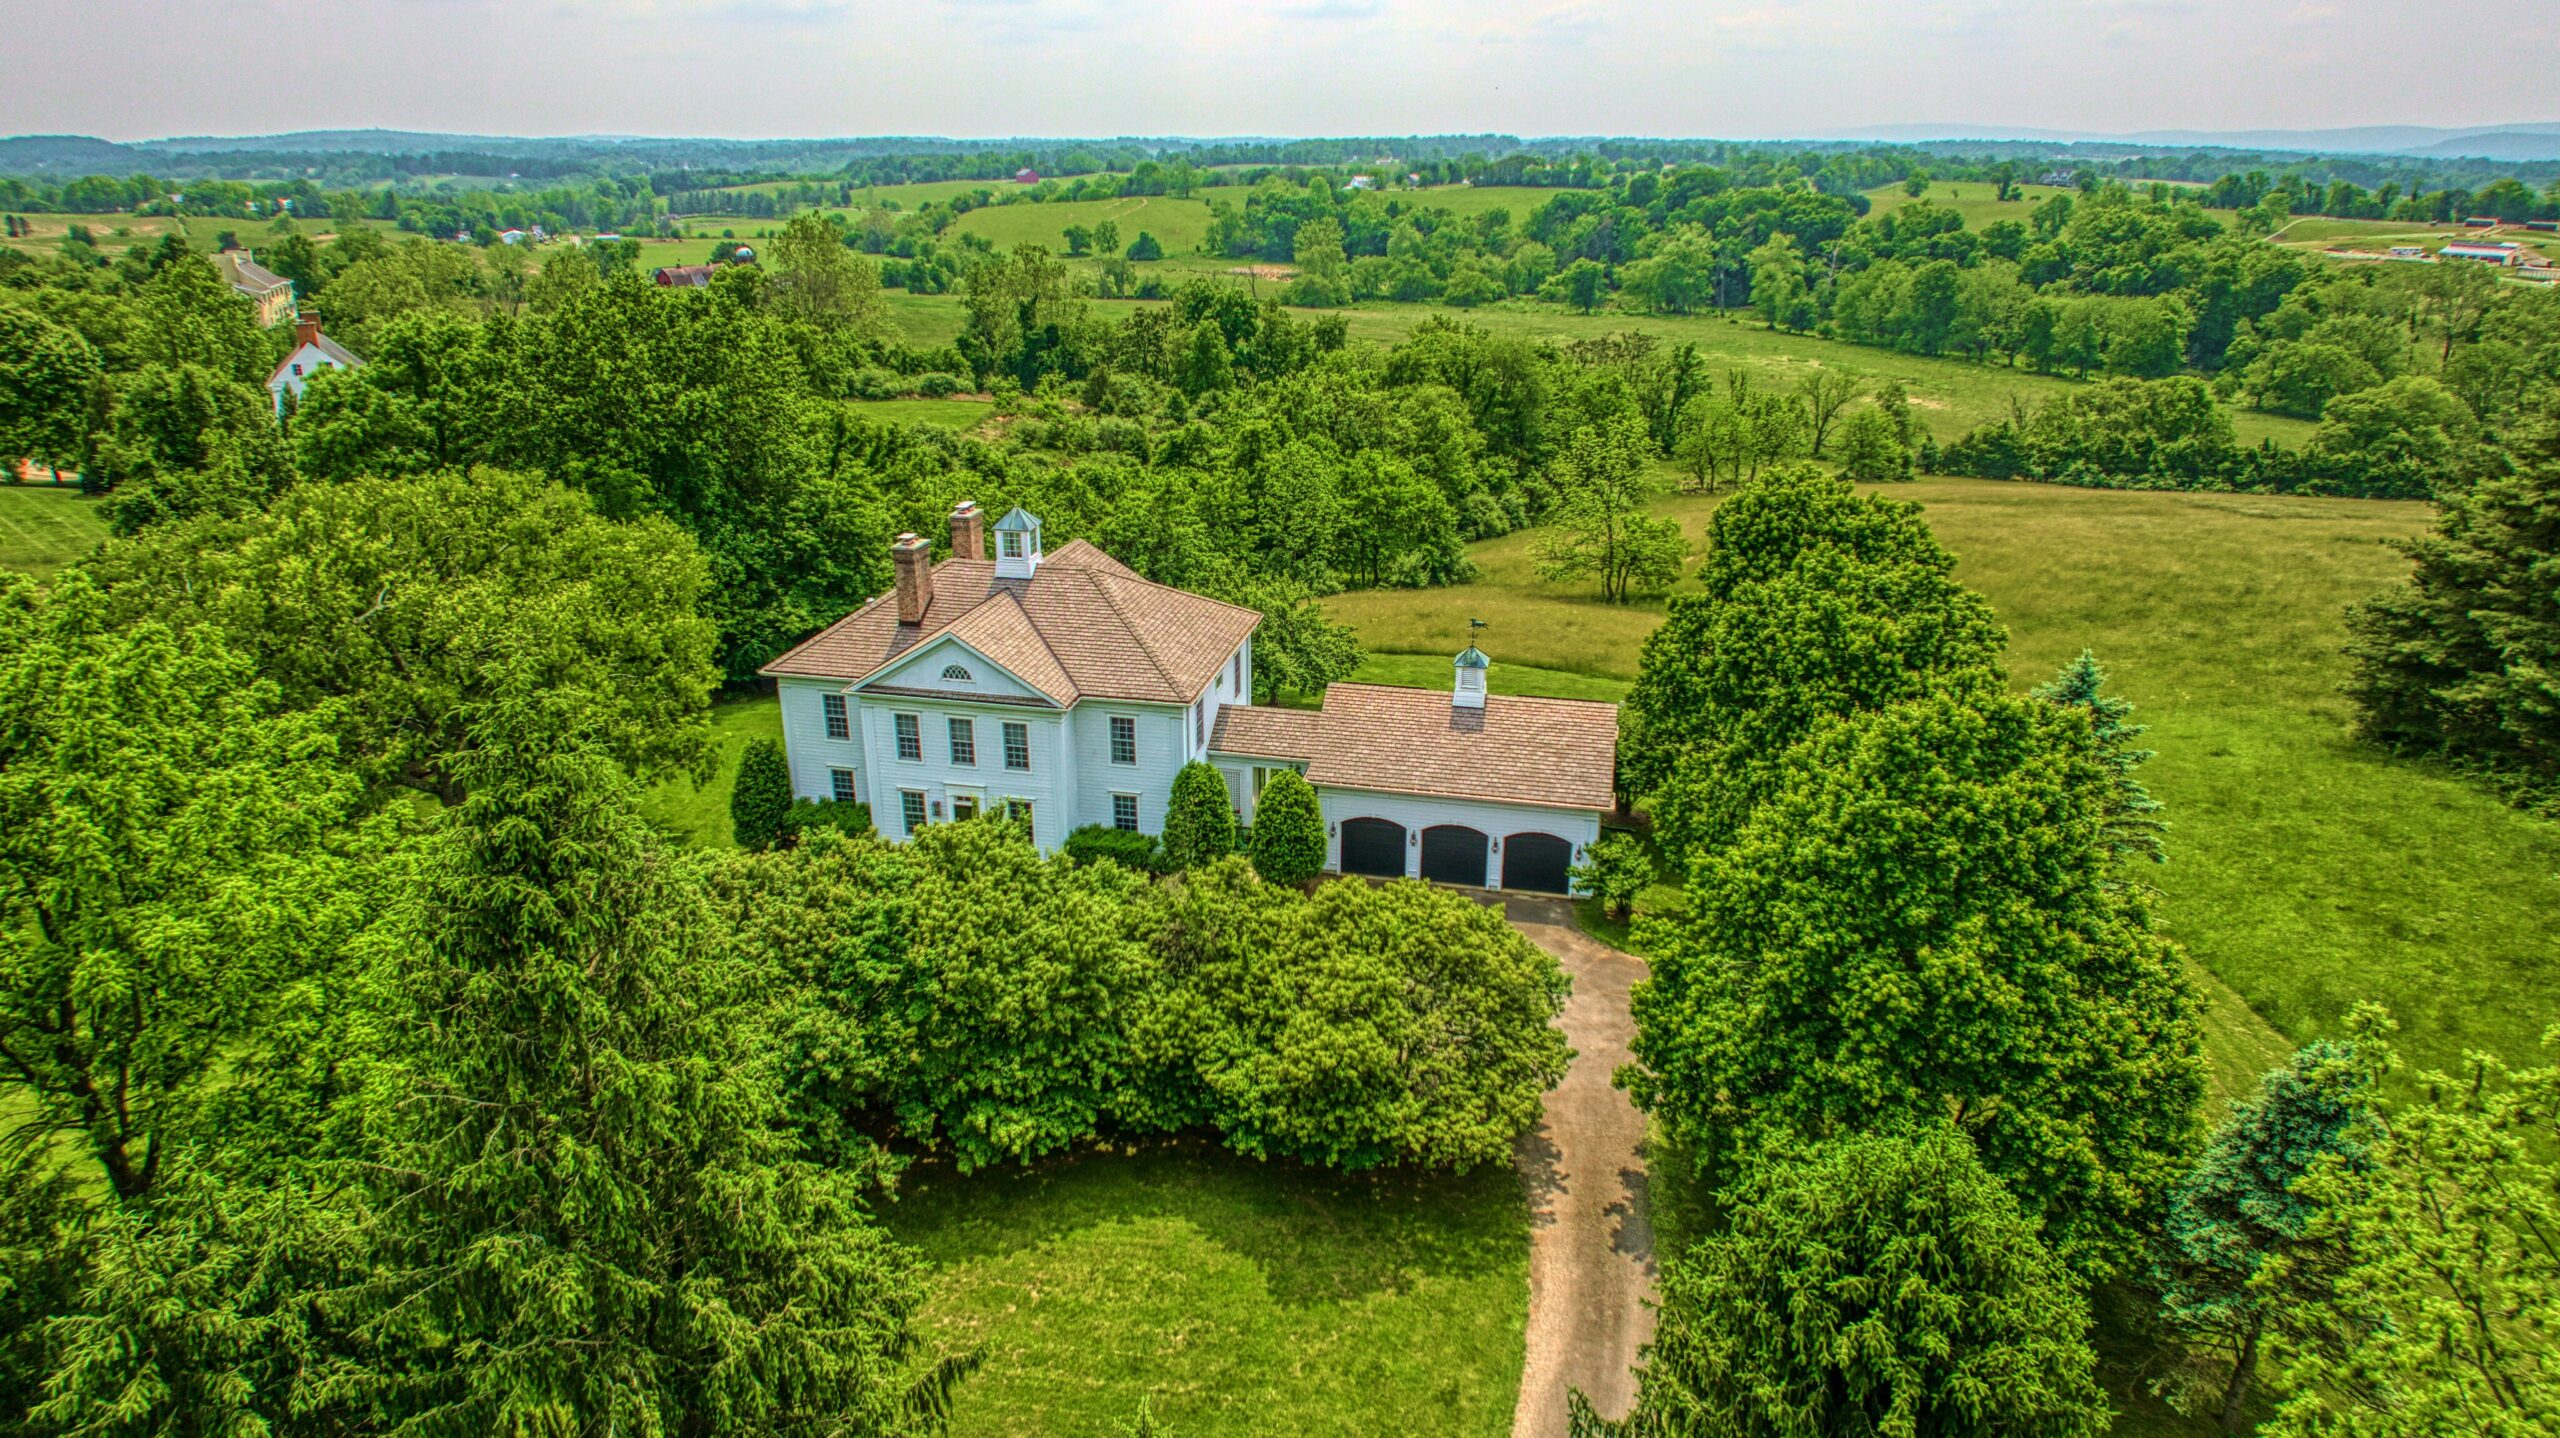 Professional drone aerial photo of 15203 Clover Hill Road - showing the front of the white home surrounded by trees and 3-bay garage visible